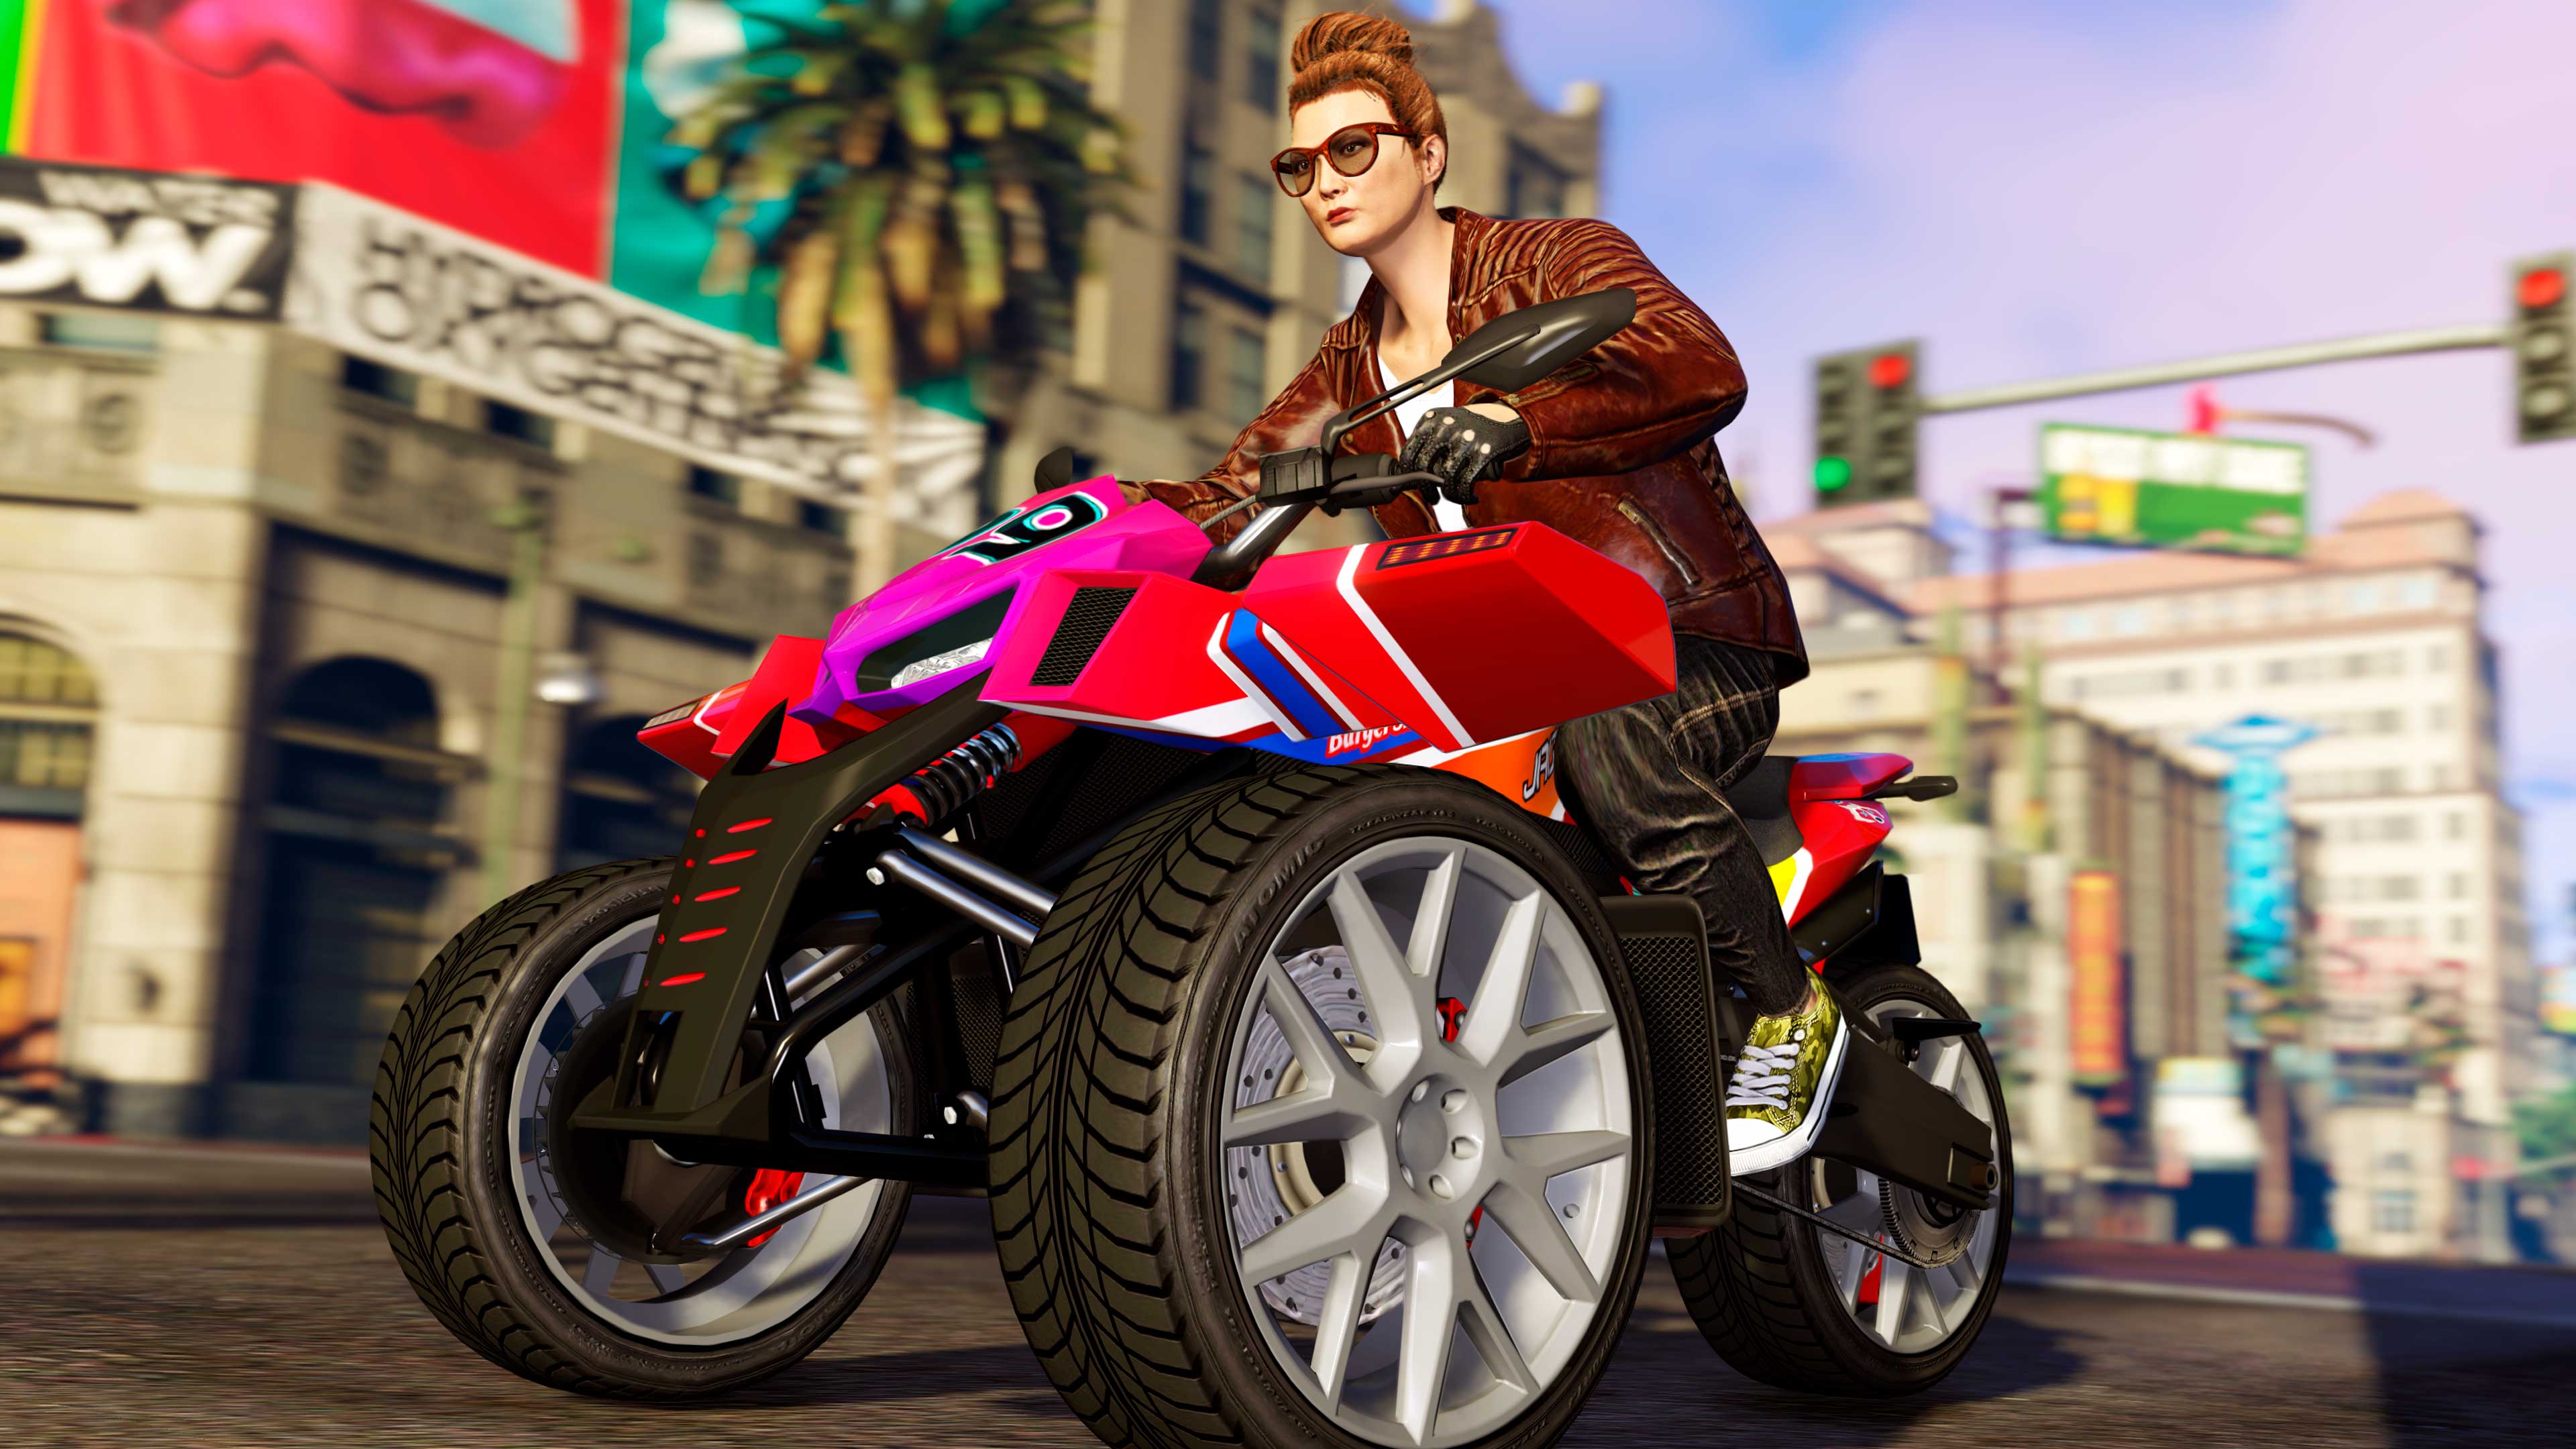 GTA Online Prize Ride December 14: How to get Pegassi Monroe for free -  Charlie INTEL